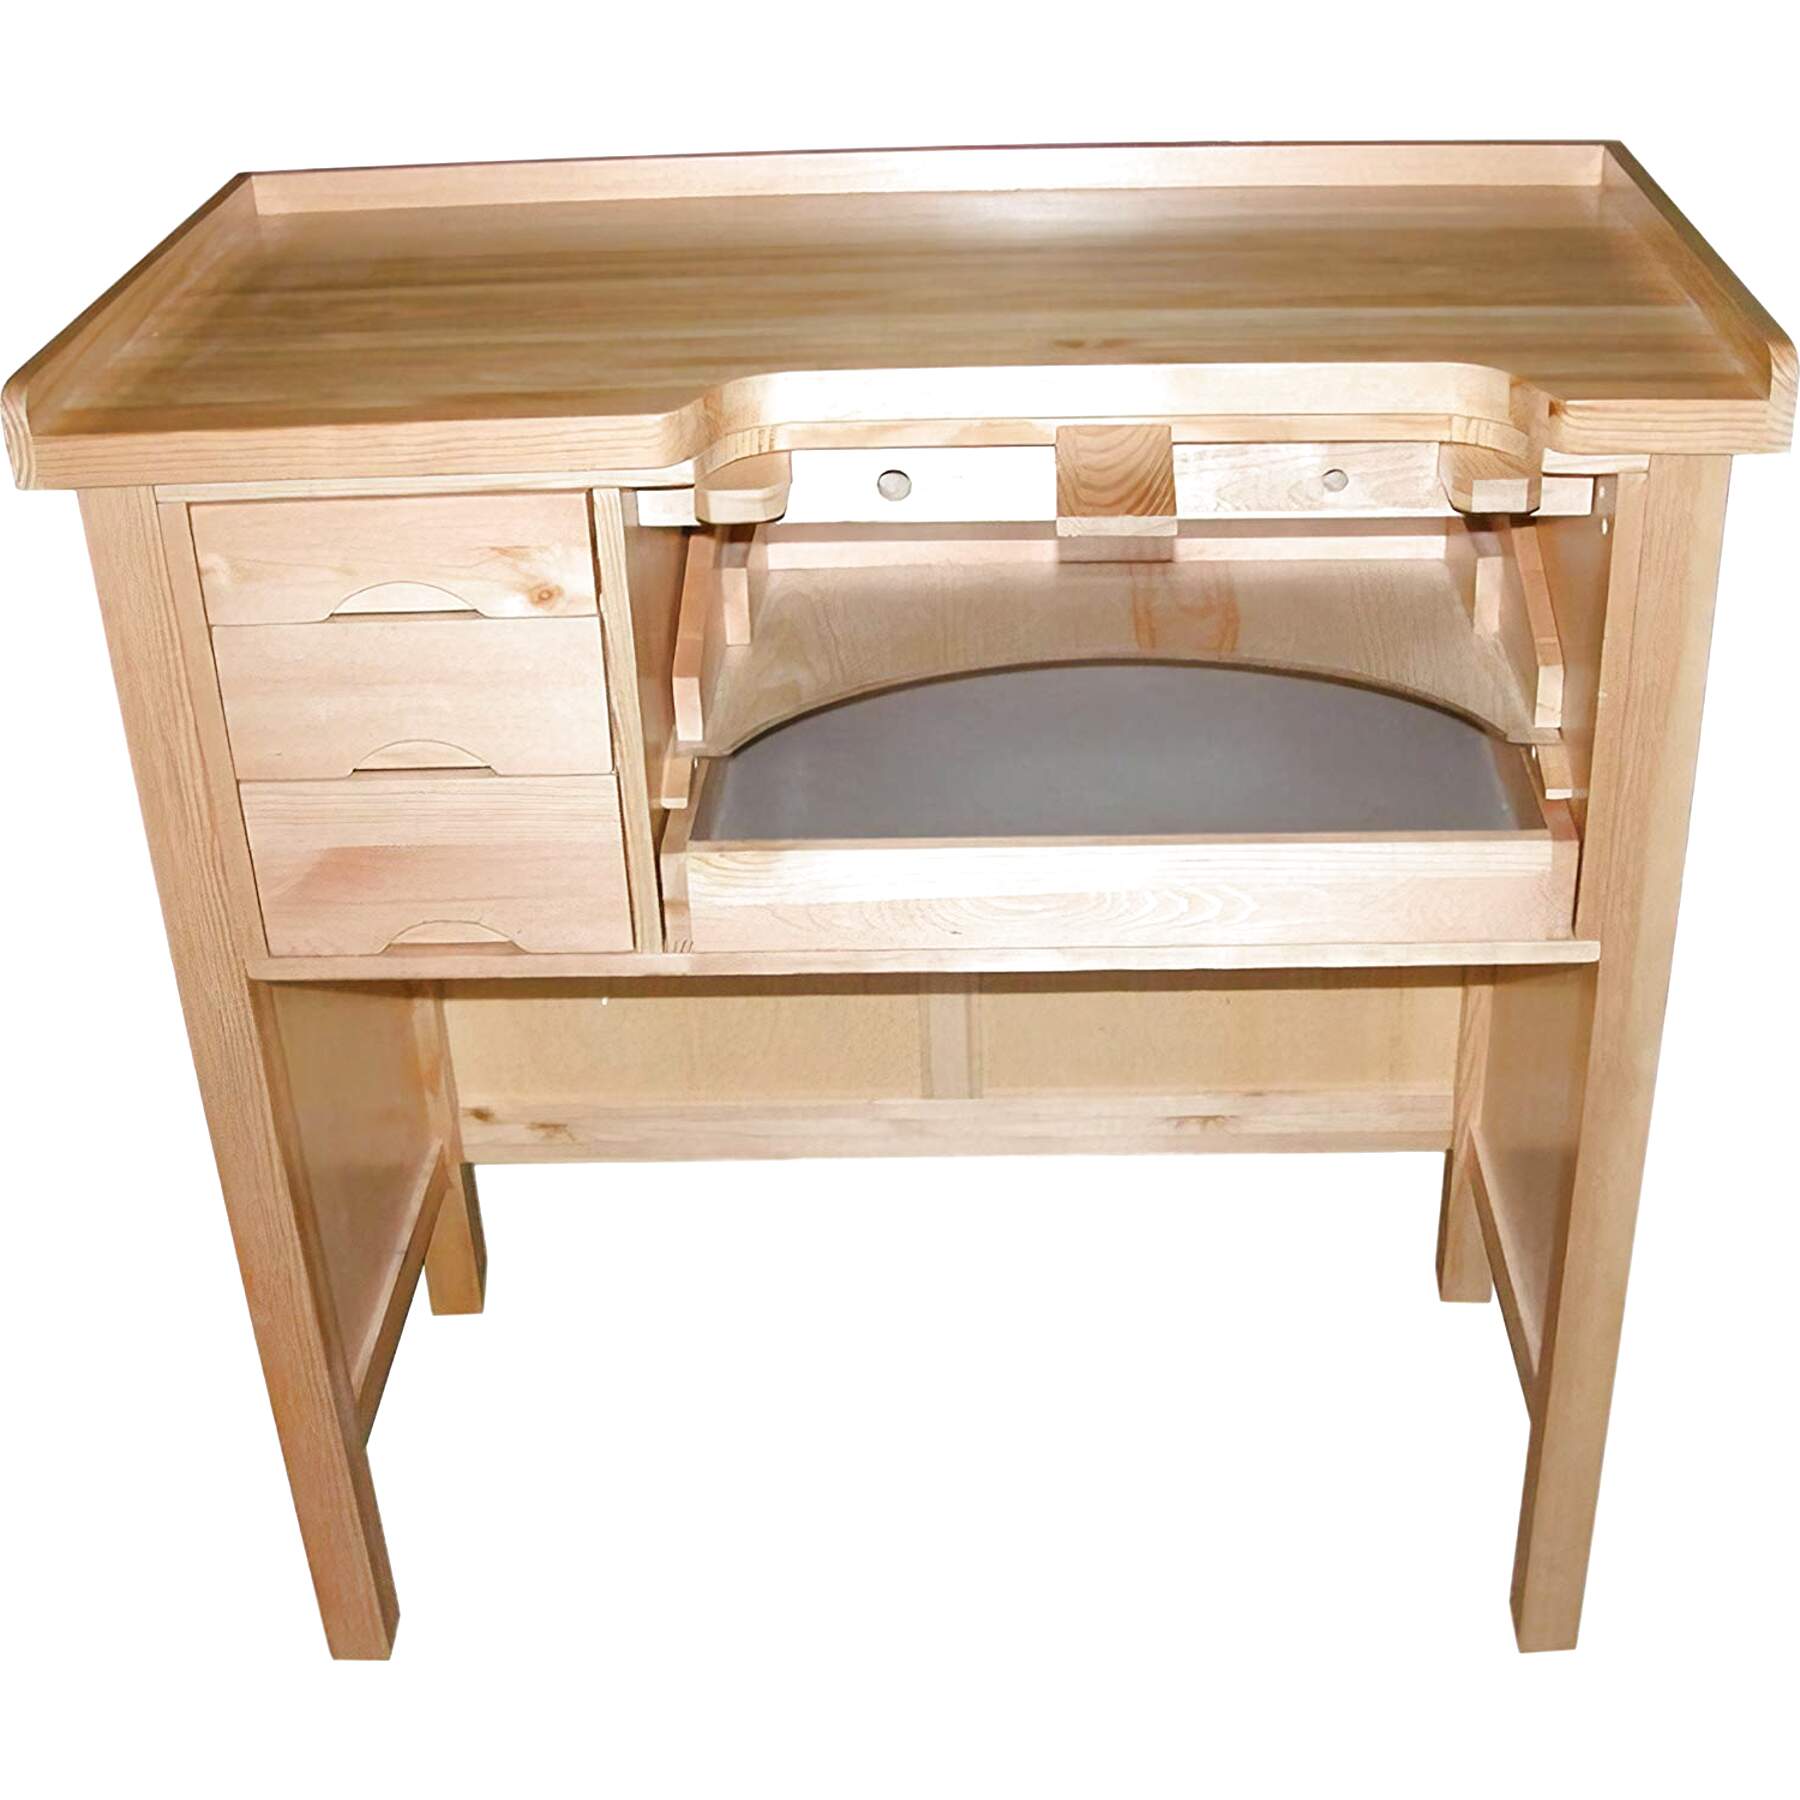 Jewelers Workbench For Sale In Uk View 16 Bargains